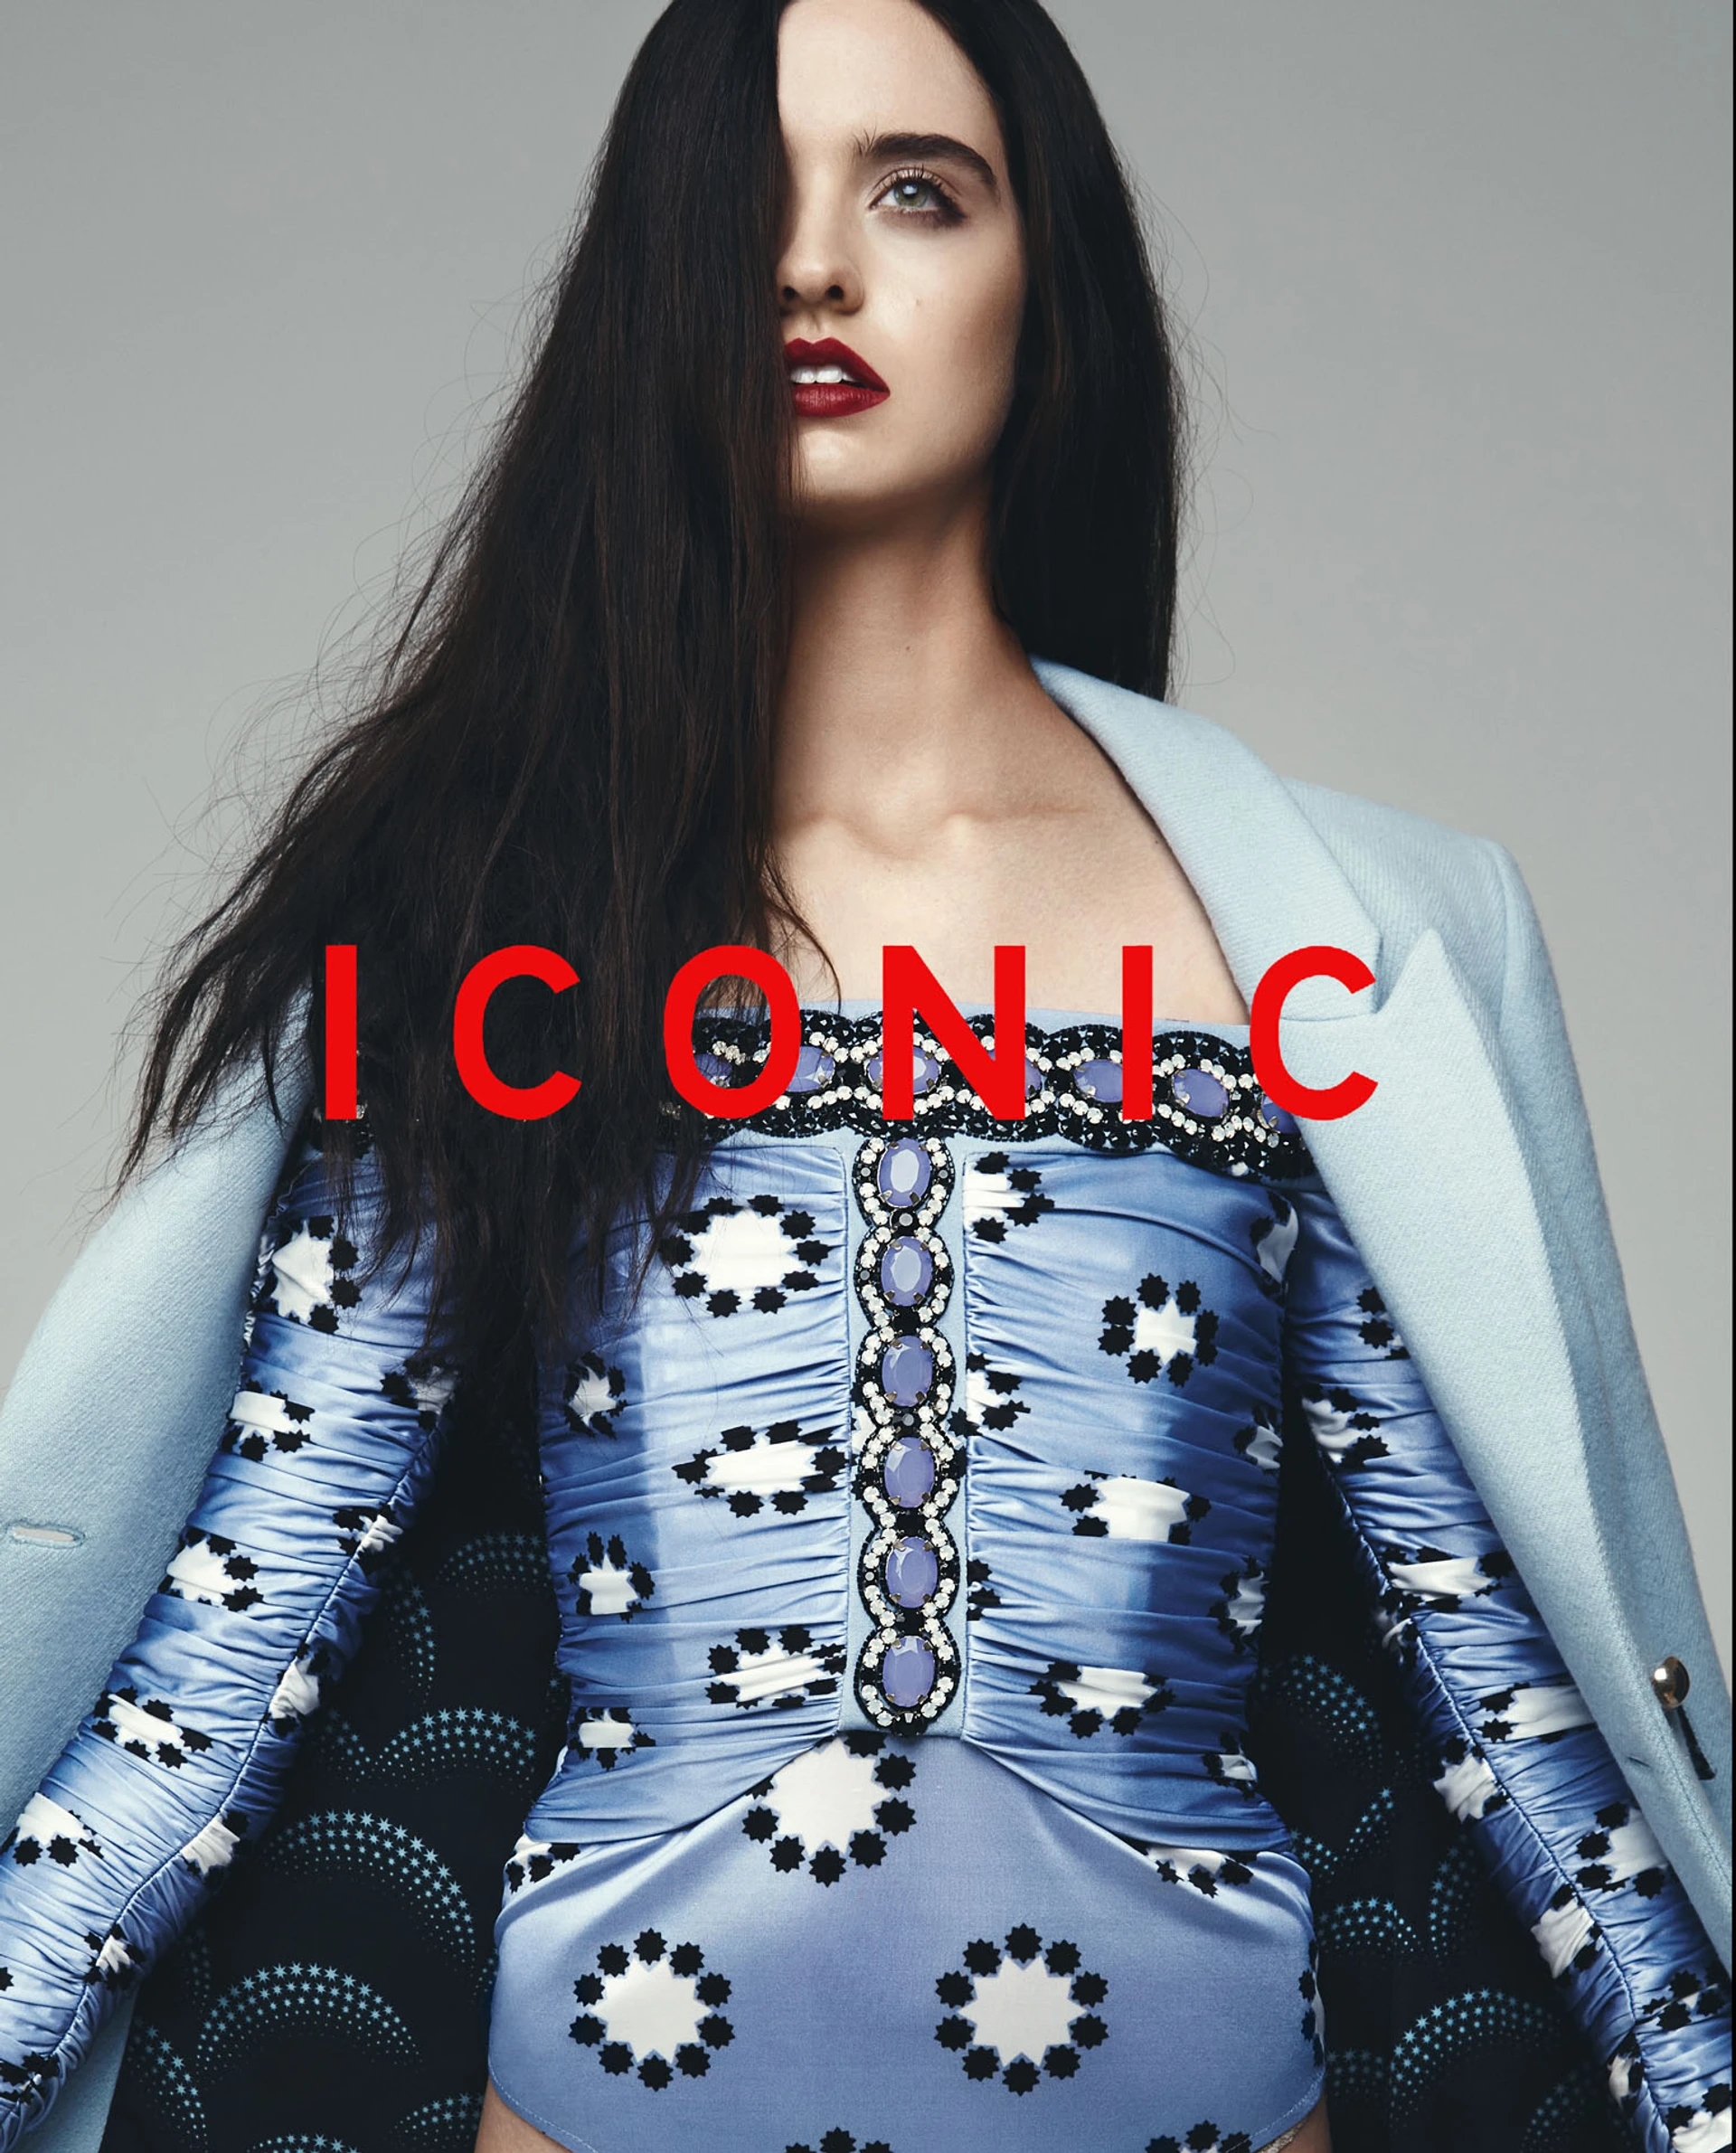 Close-up of a woman with long dark hair wearing a blue and white patterned dress, paired with a light blue coat. The word 'ICONIC' is prominently displayed across the image for Wanted Magazine.